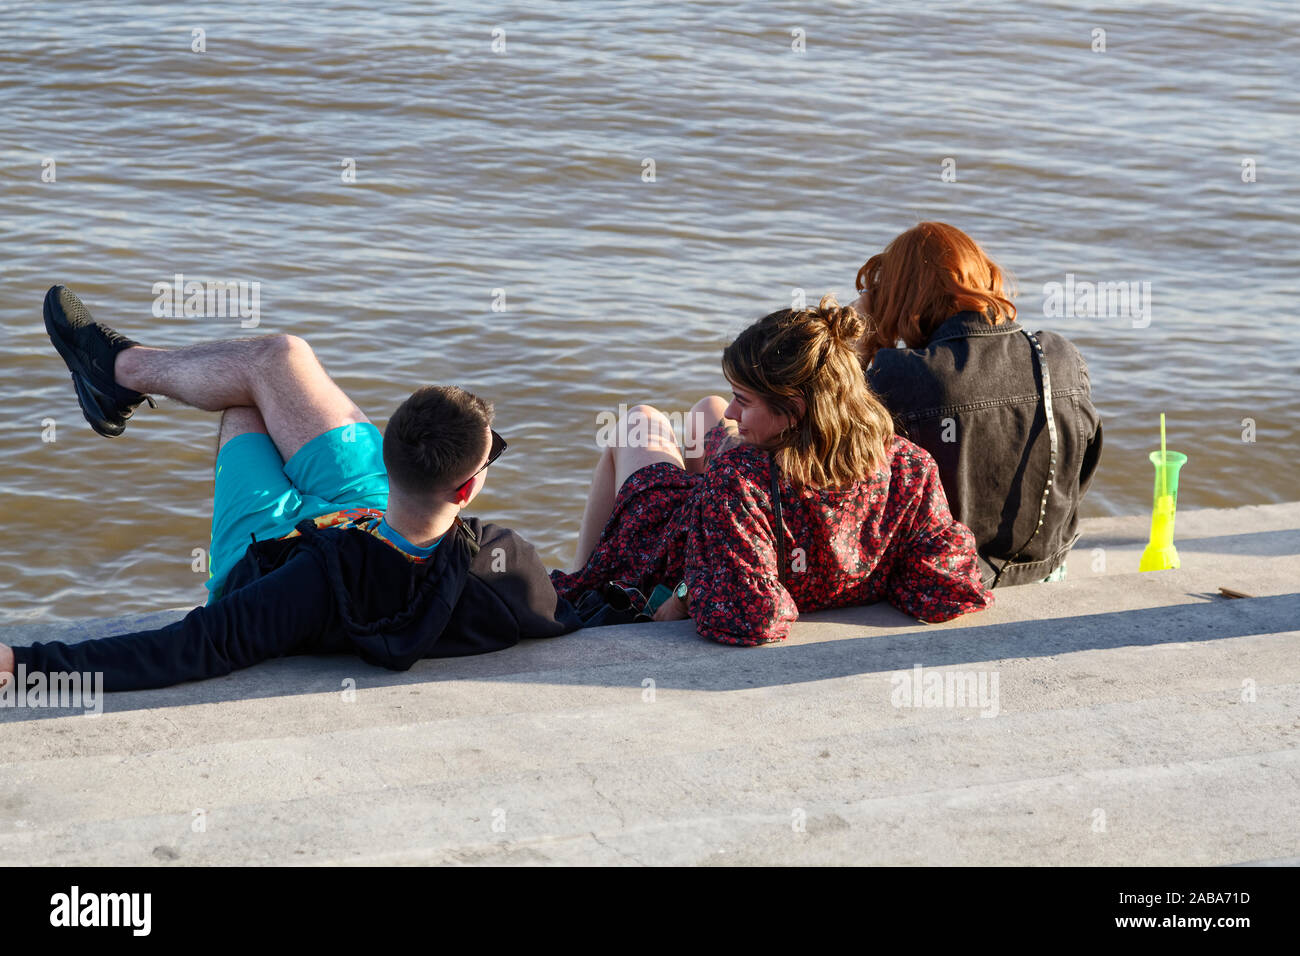 3 people sitting by water, talking, neon daiquiri glass, friends, Moonwalk; Mississippi River, New Orleans; LA; USA; autumn; horizontal Stock Photo